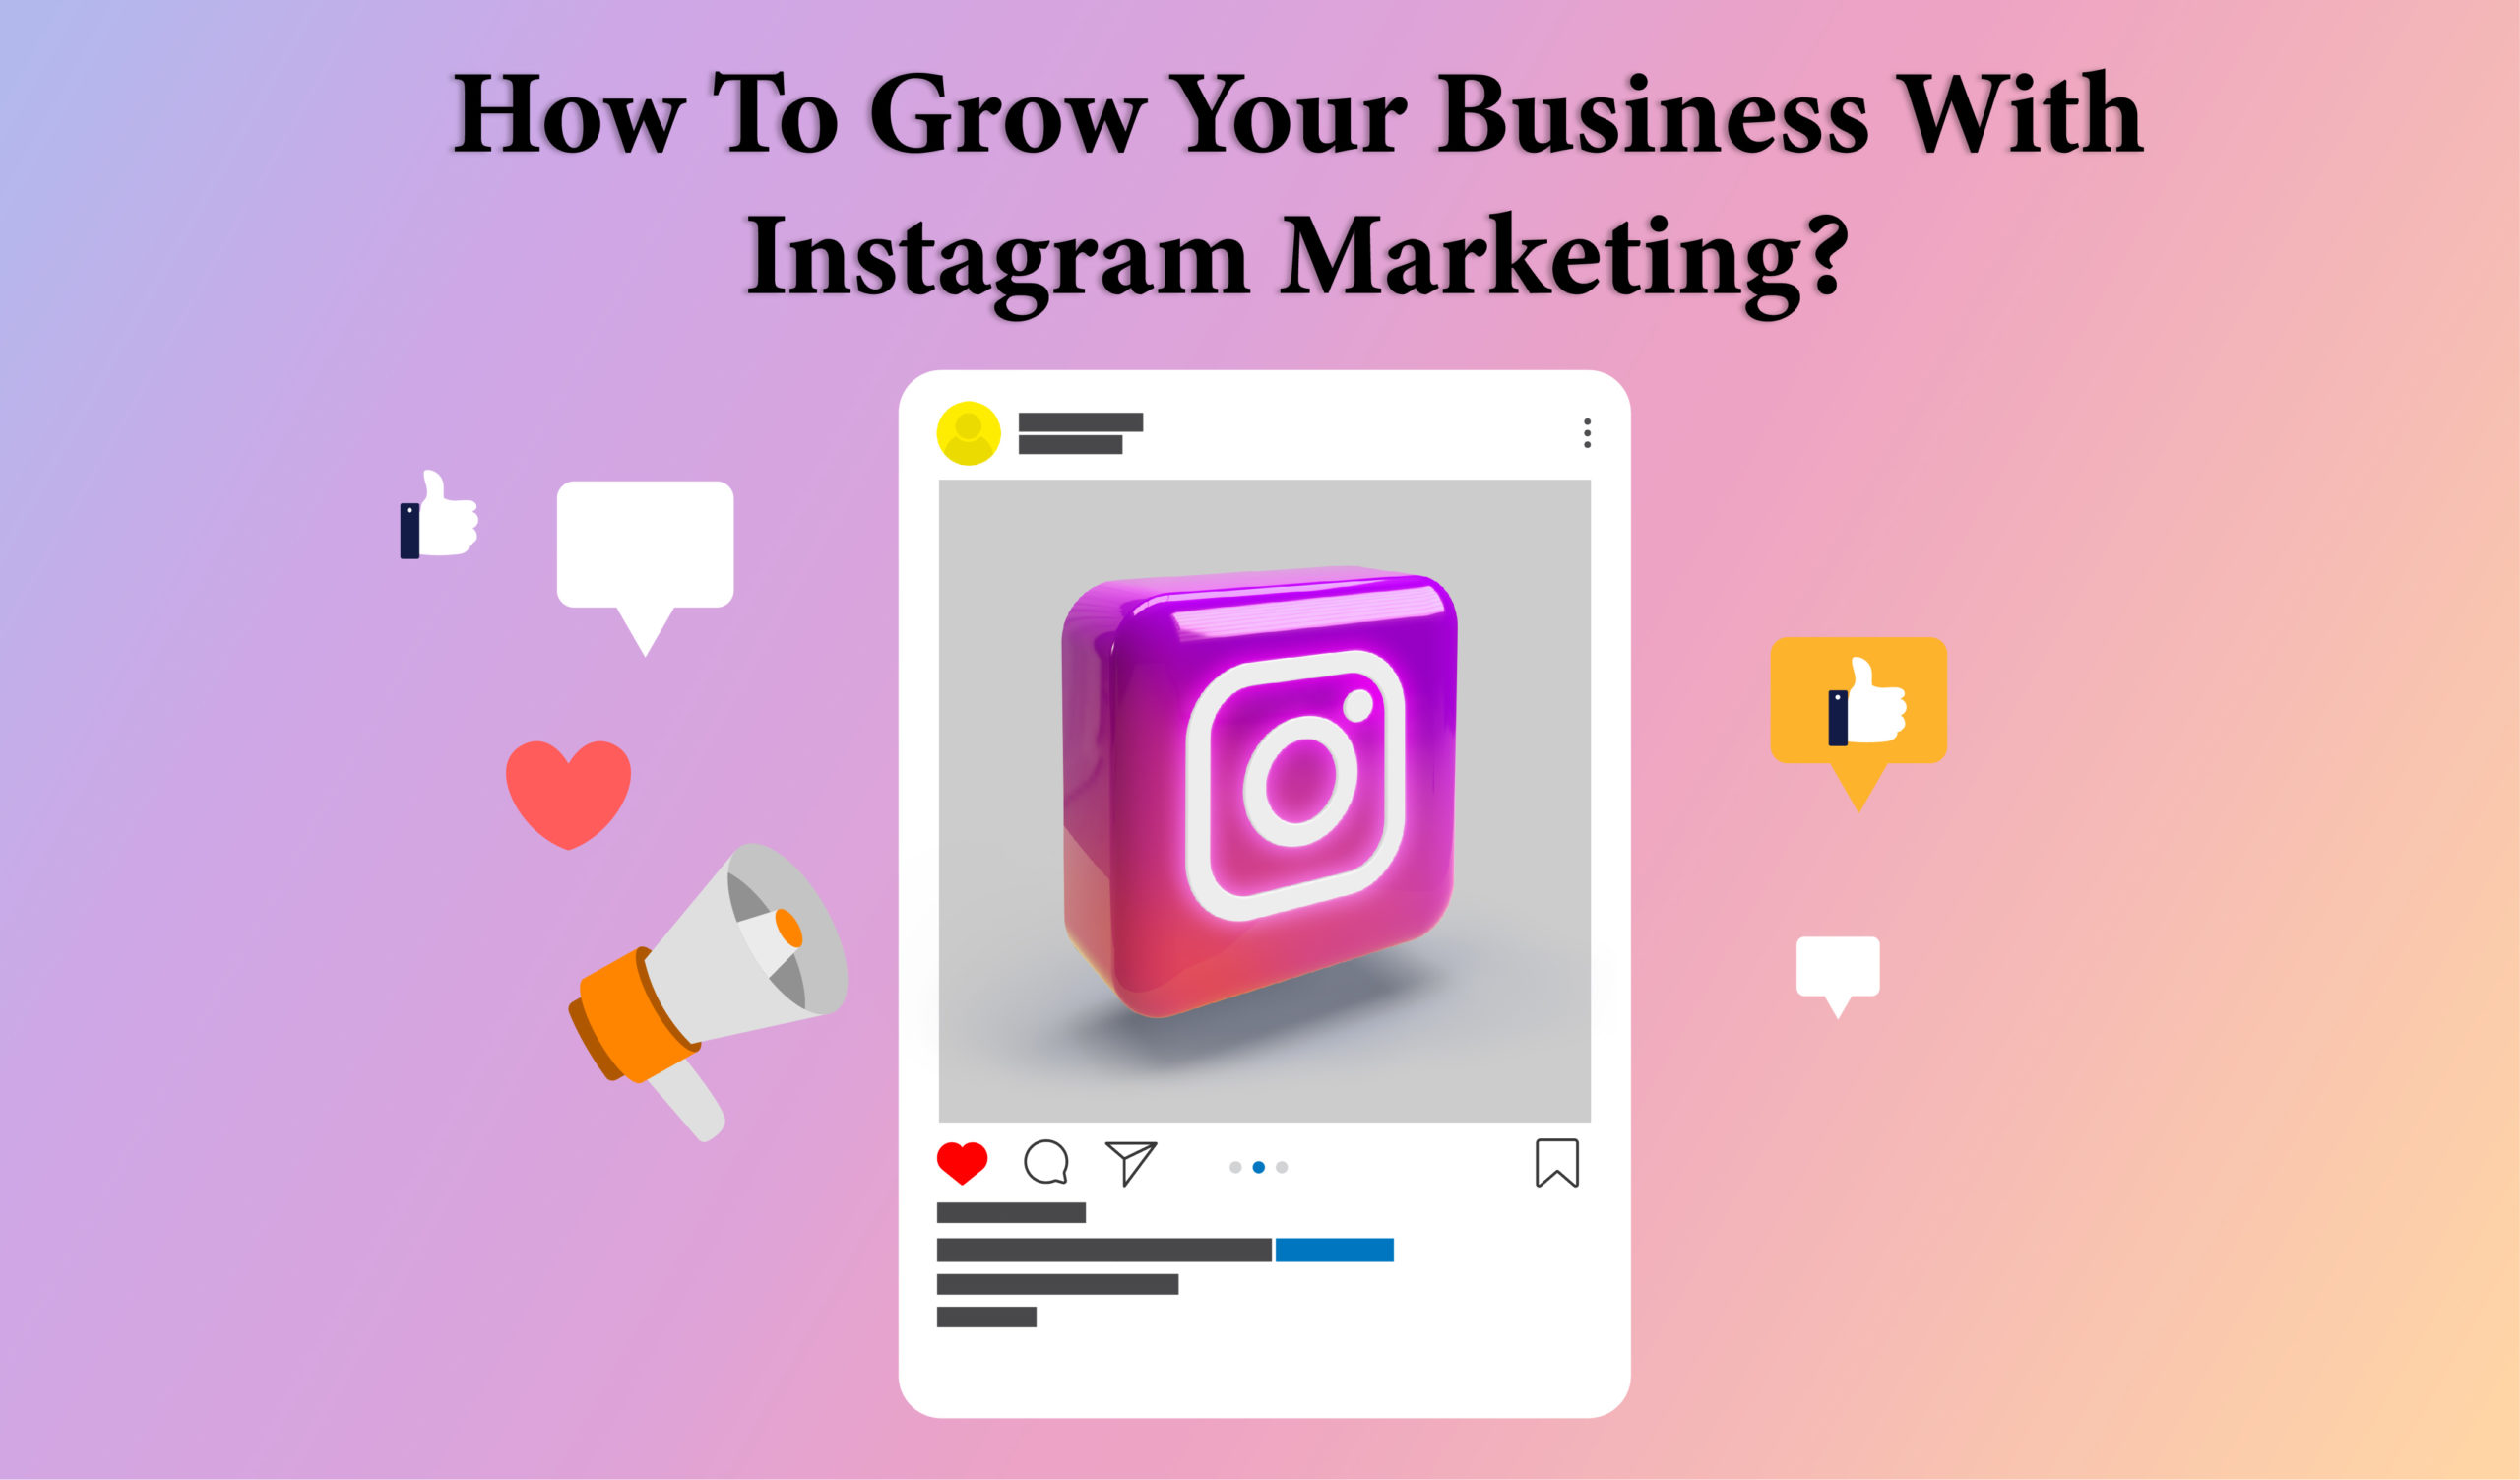 HOW TO GROW YOUR BUSINESS WITH INSTAGRAM MARKETING?